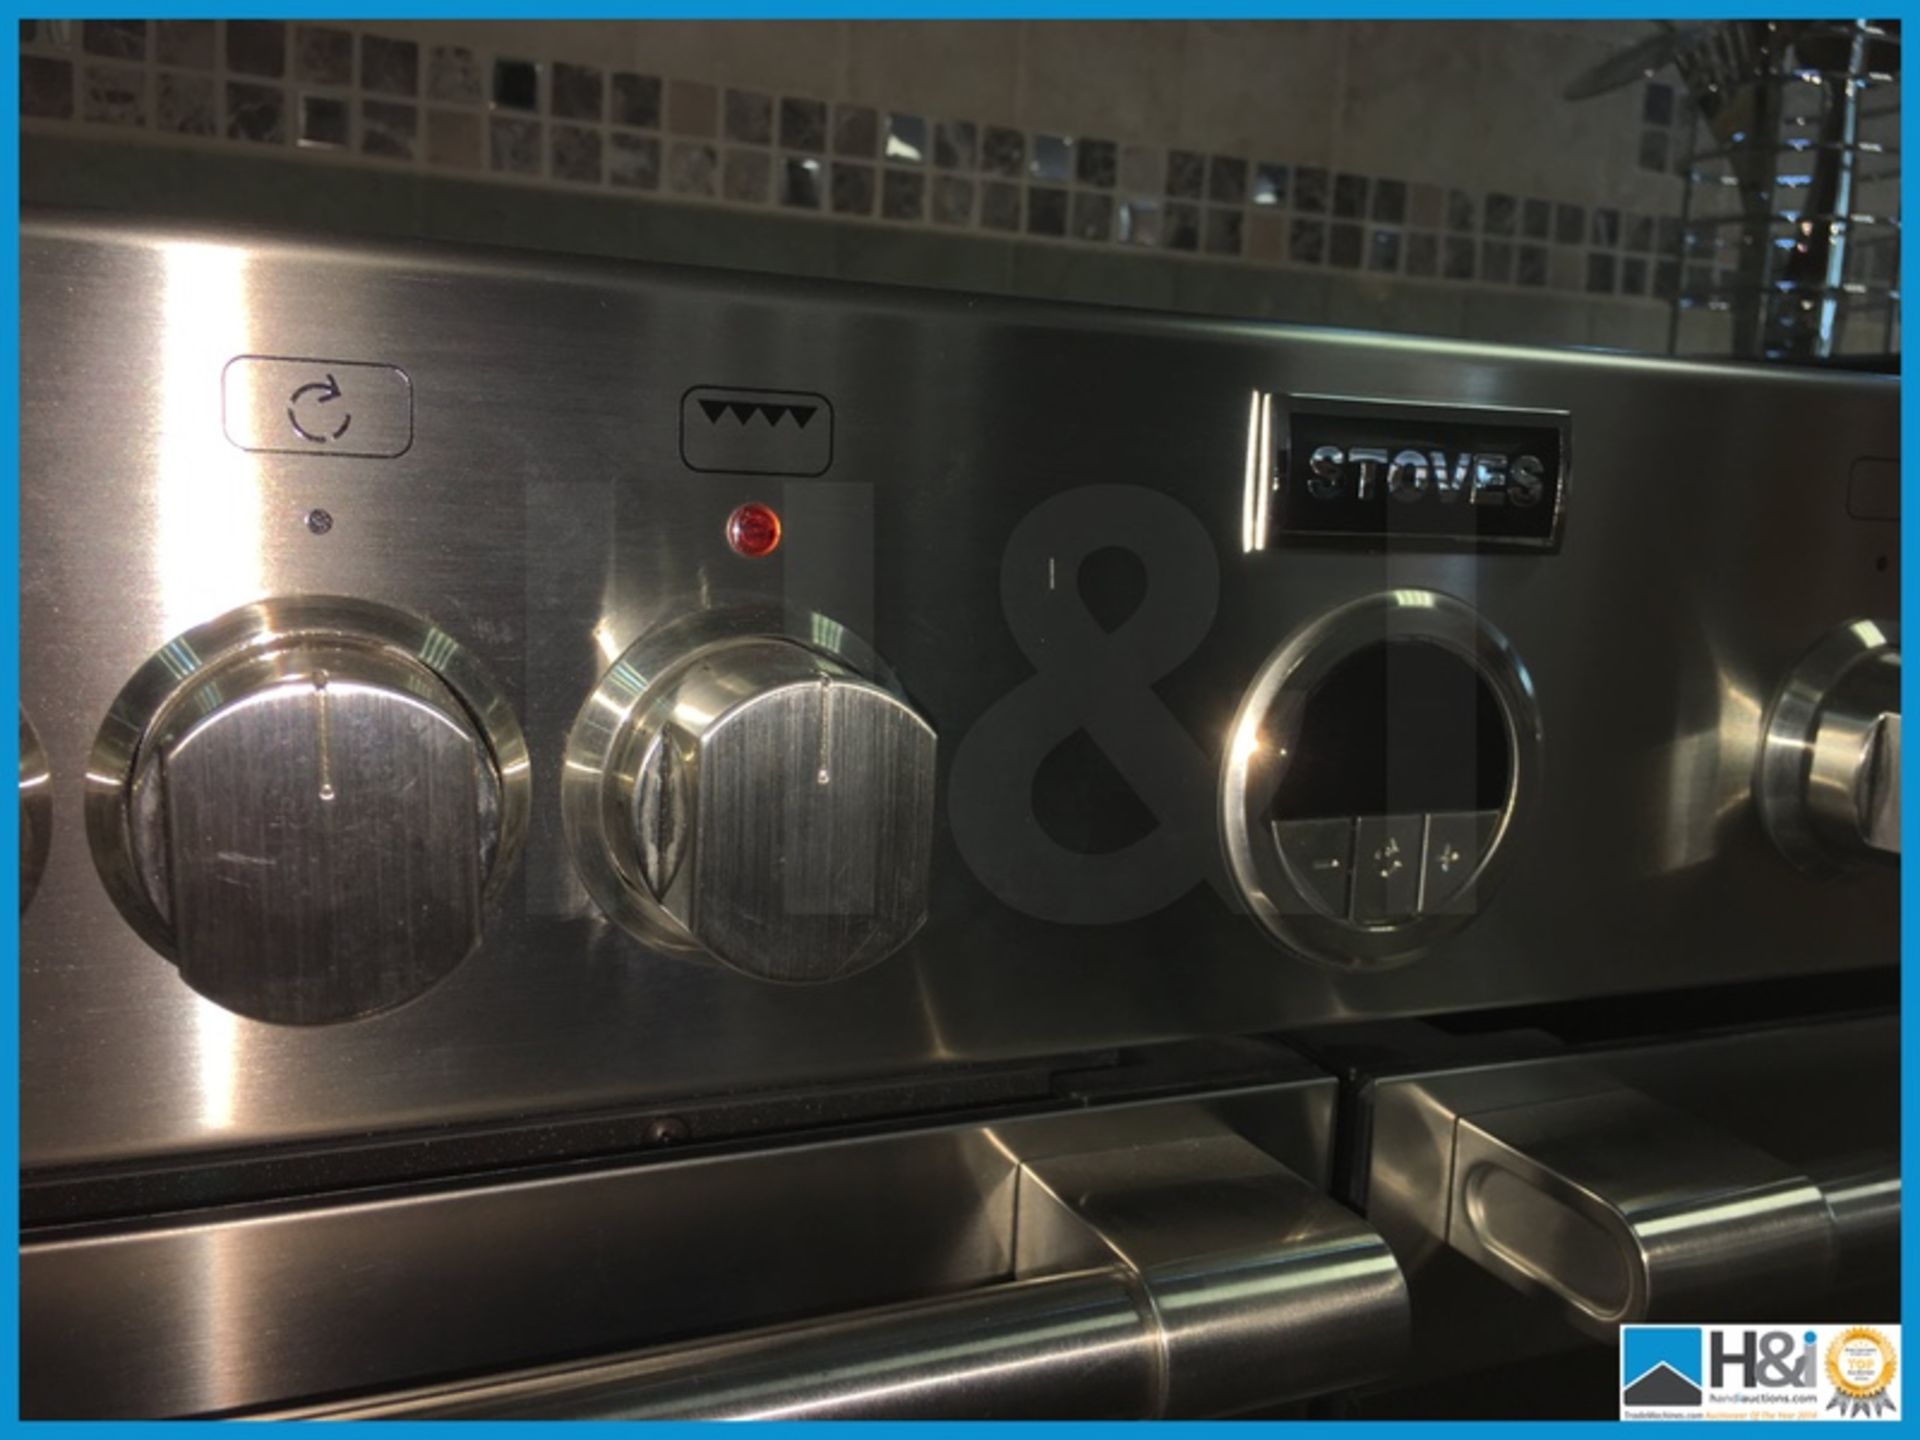 Stoves stainless steel double oven 800 wide with 5 gas burners and lower pan storage. Also - Image 6 of 7